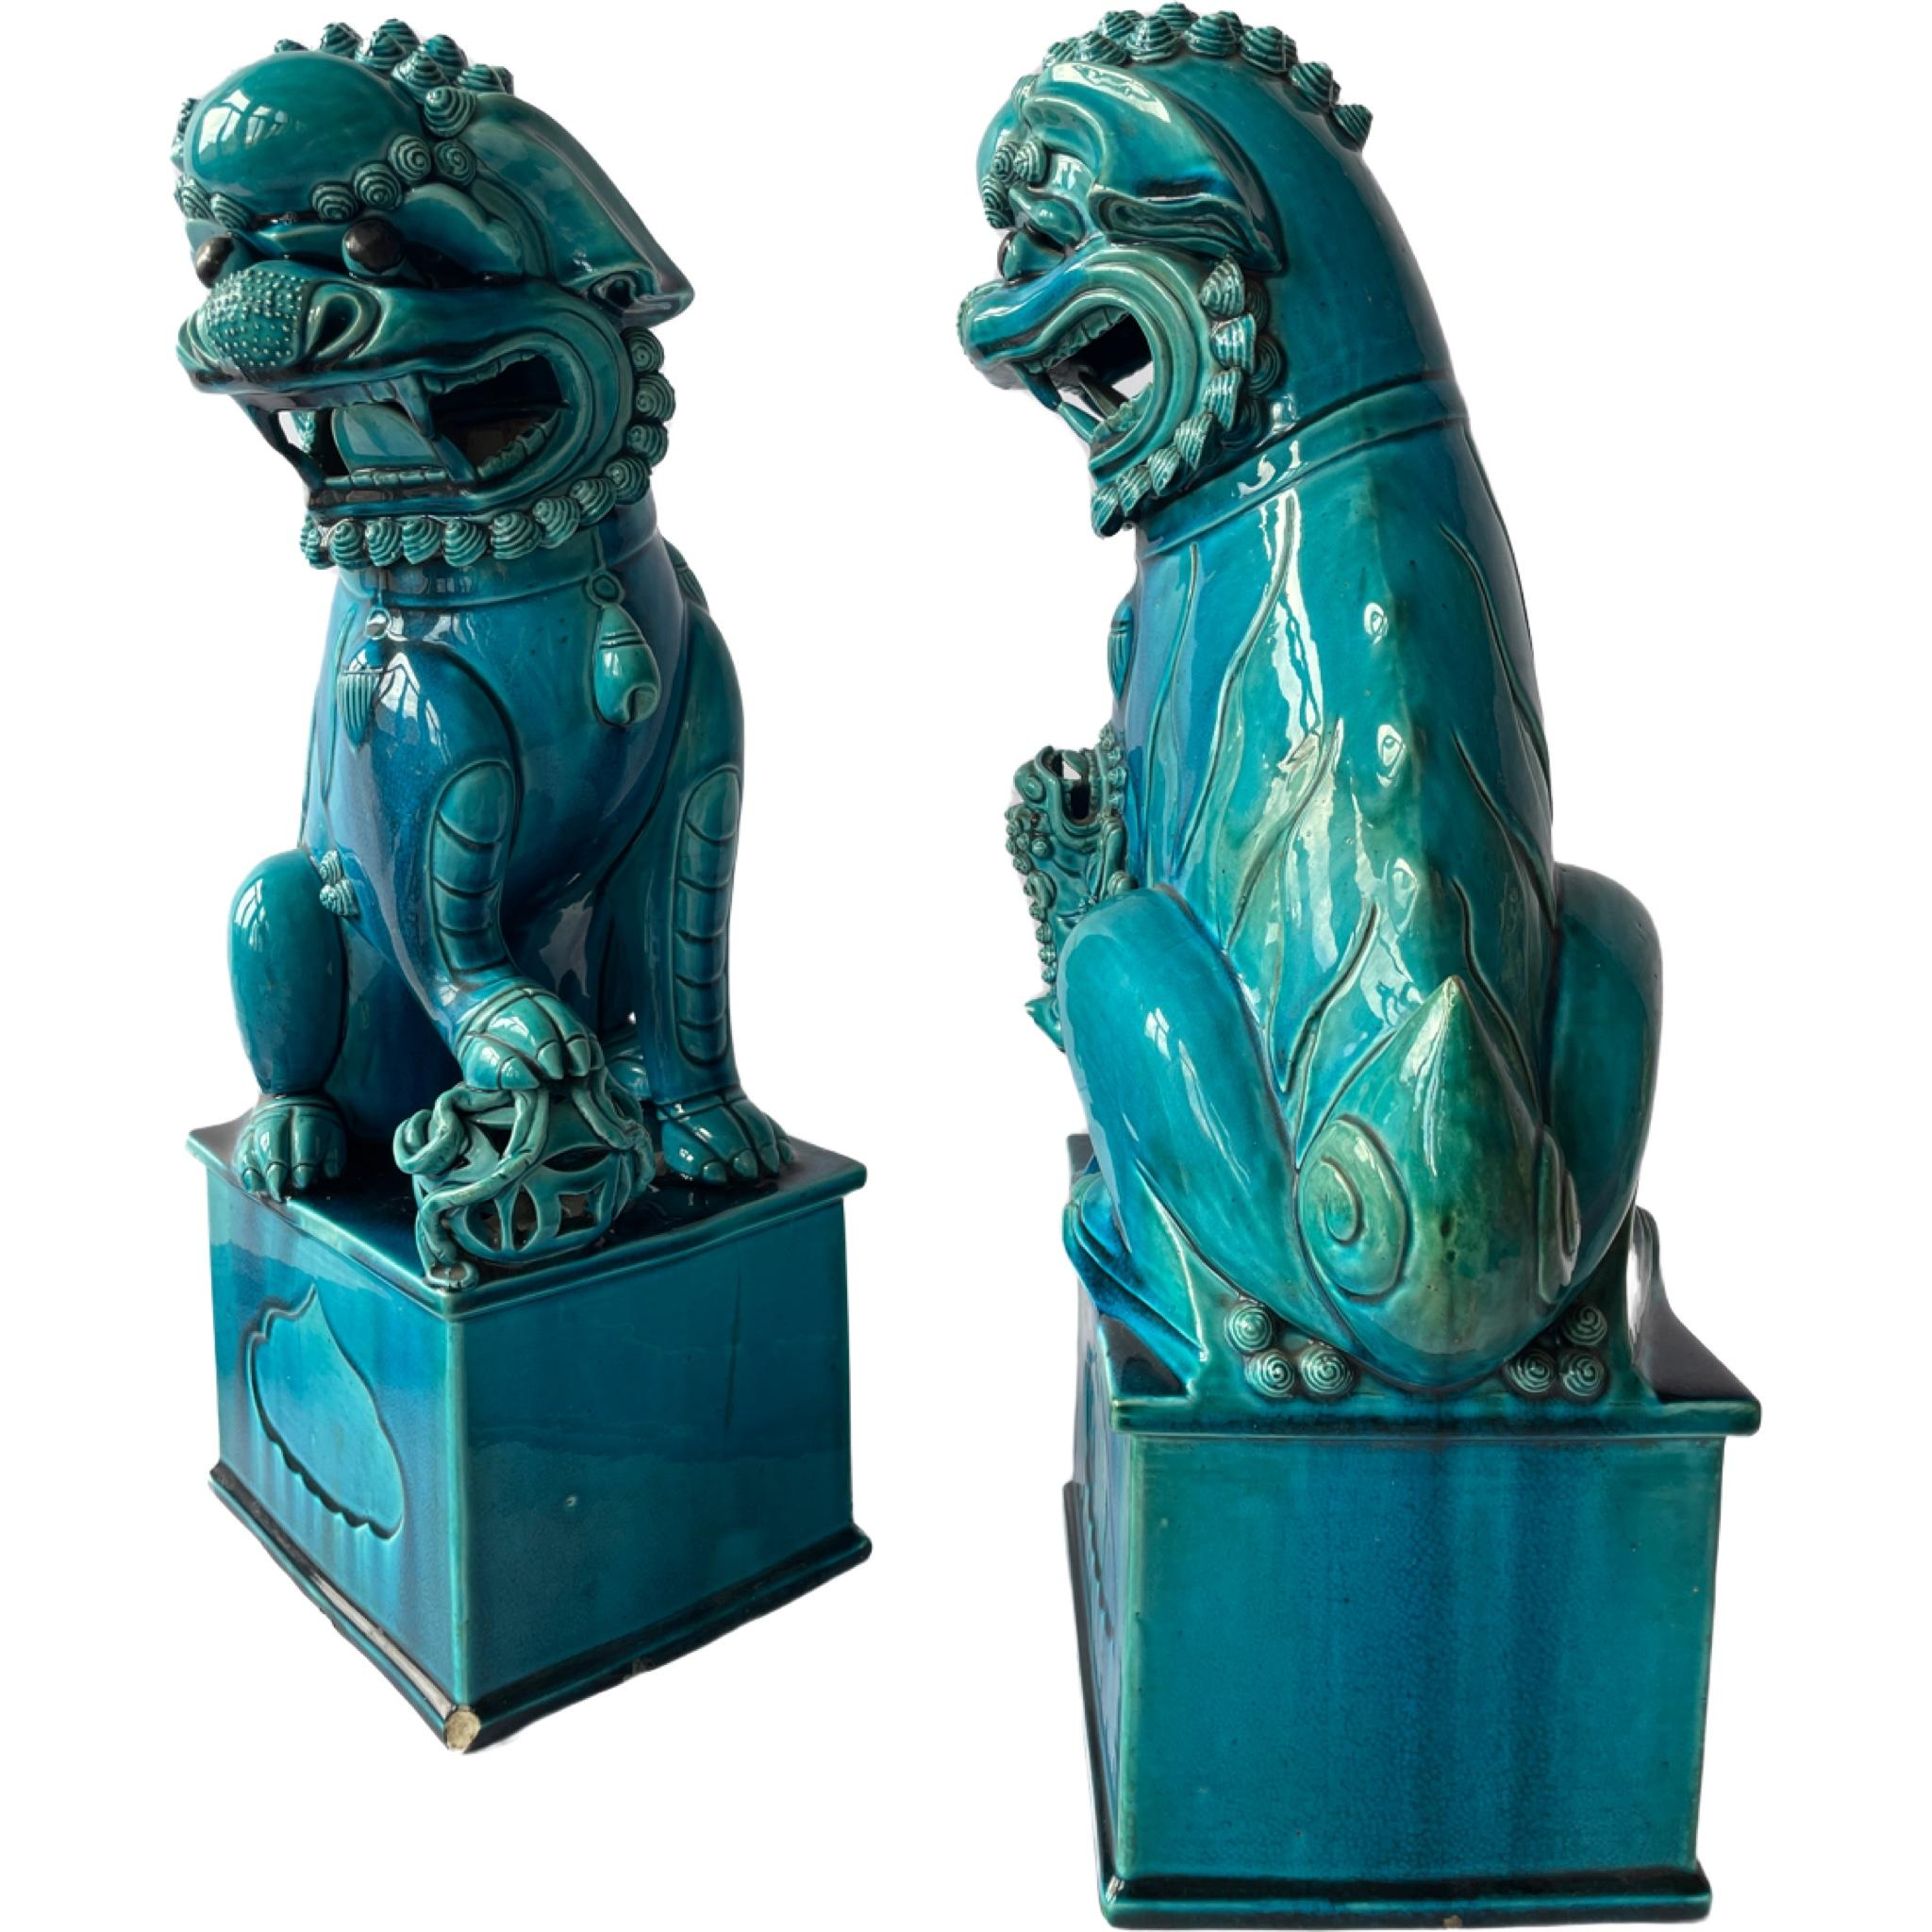 Chinese turquoise-colored porcelain foo dogs from circa 1880 are exquisite examples of traditional Chinese ceramic art. Foo dogs, also known as guardian lions or temple lions, are iconic mythical creatures in Chinese culture that symbolize